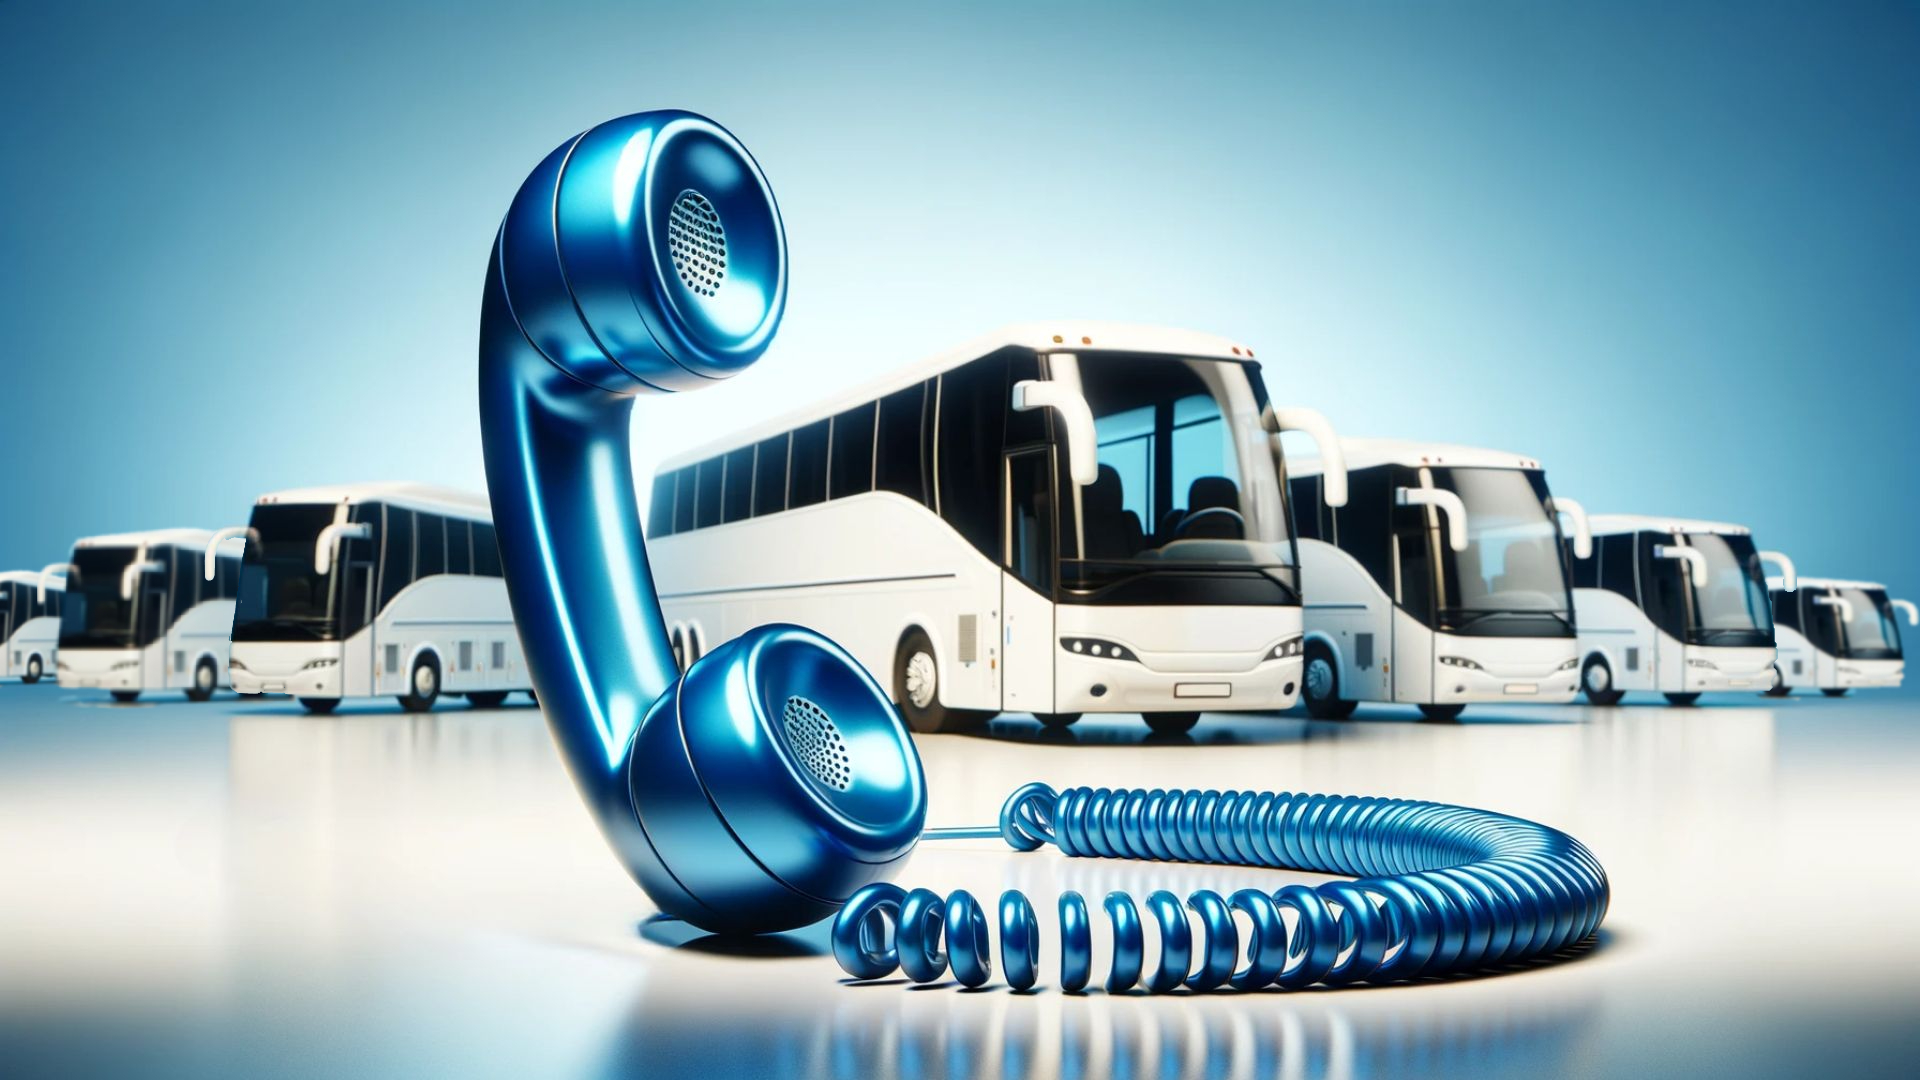 Armir Harris for Forbes: One Phone Call, 60 Buses and a Vision to Transform an Industry